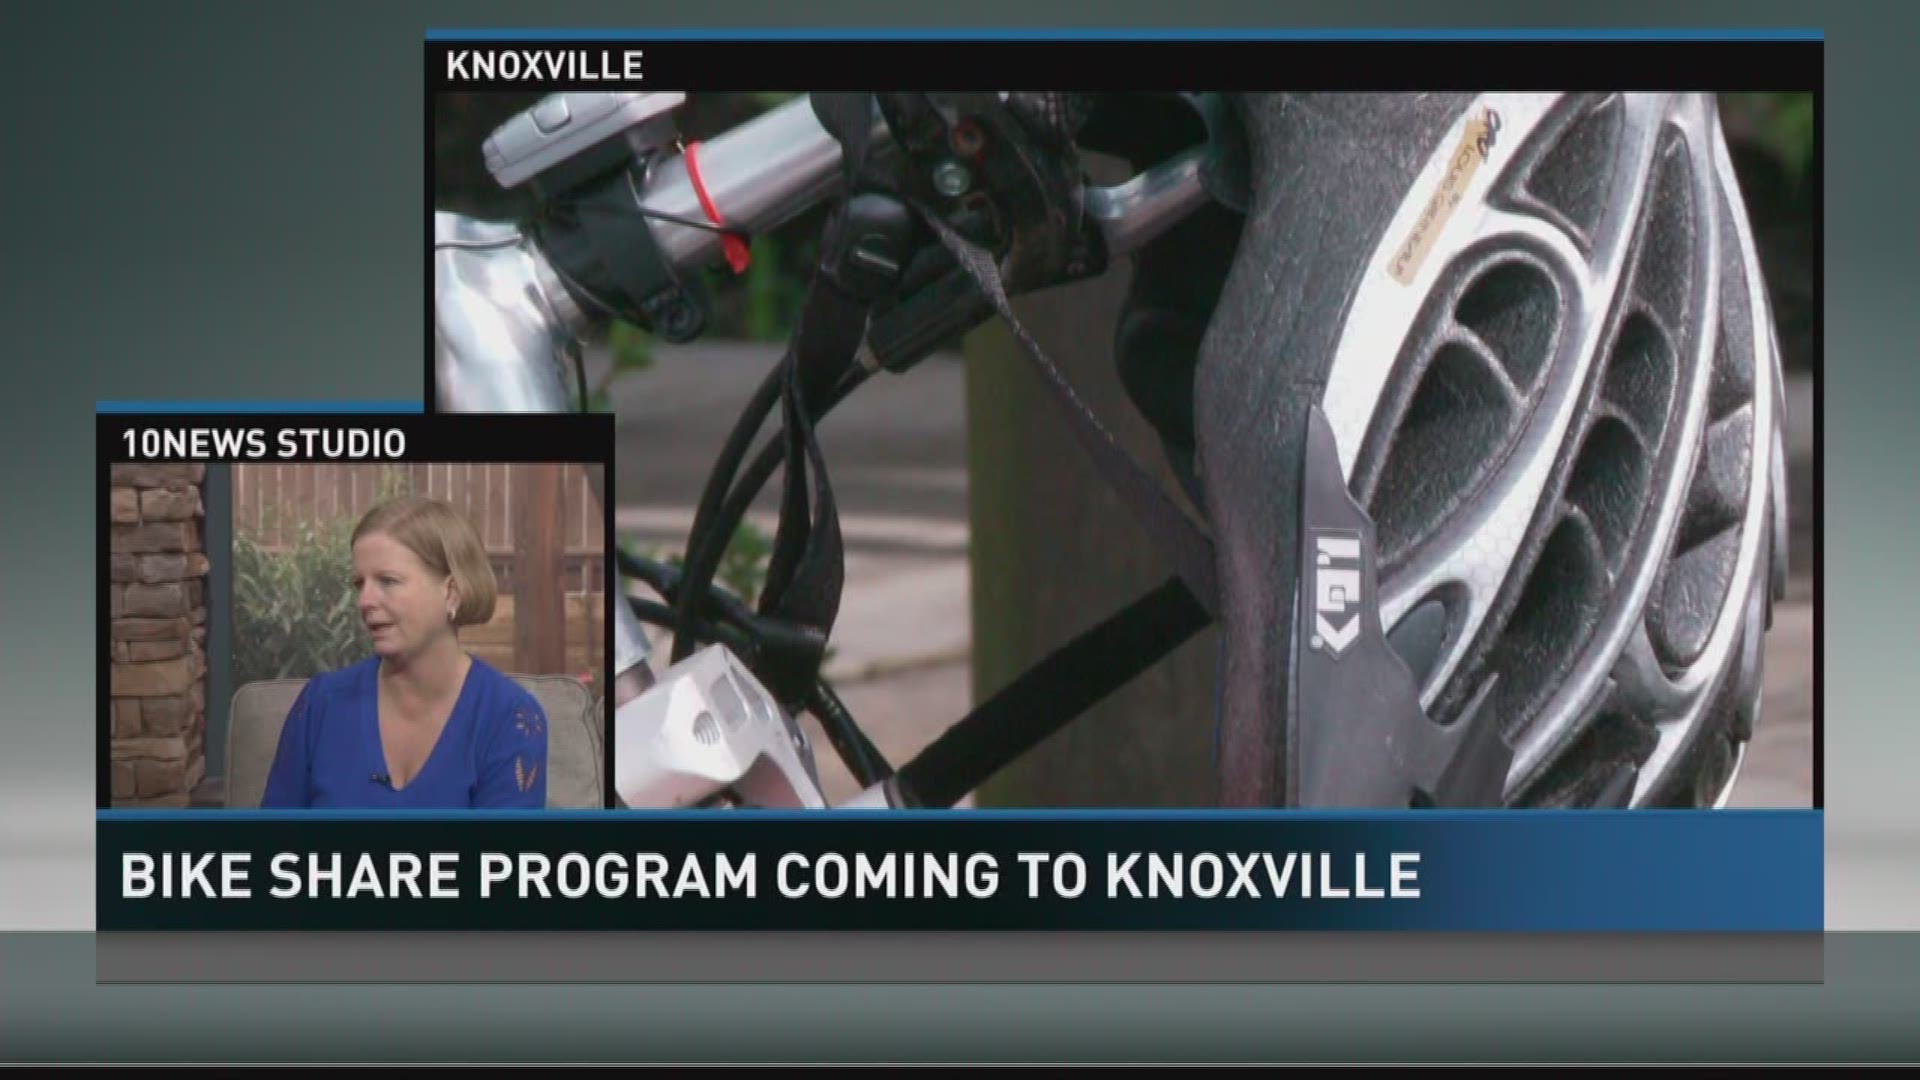 Aug. 17, 2017: Visit Knoxville President Kim Bumpas discusses the new bike share program coming to Knoxville.